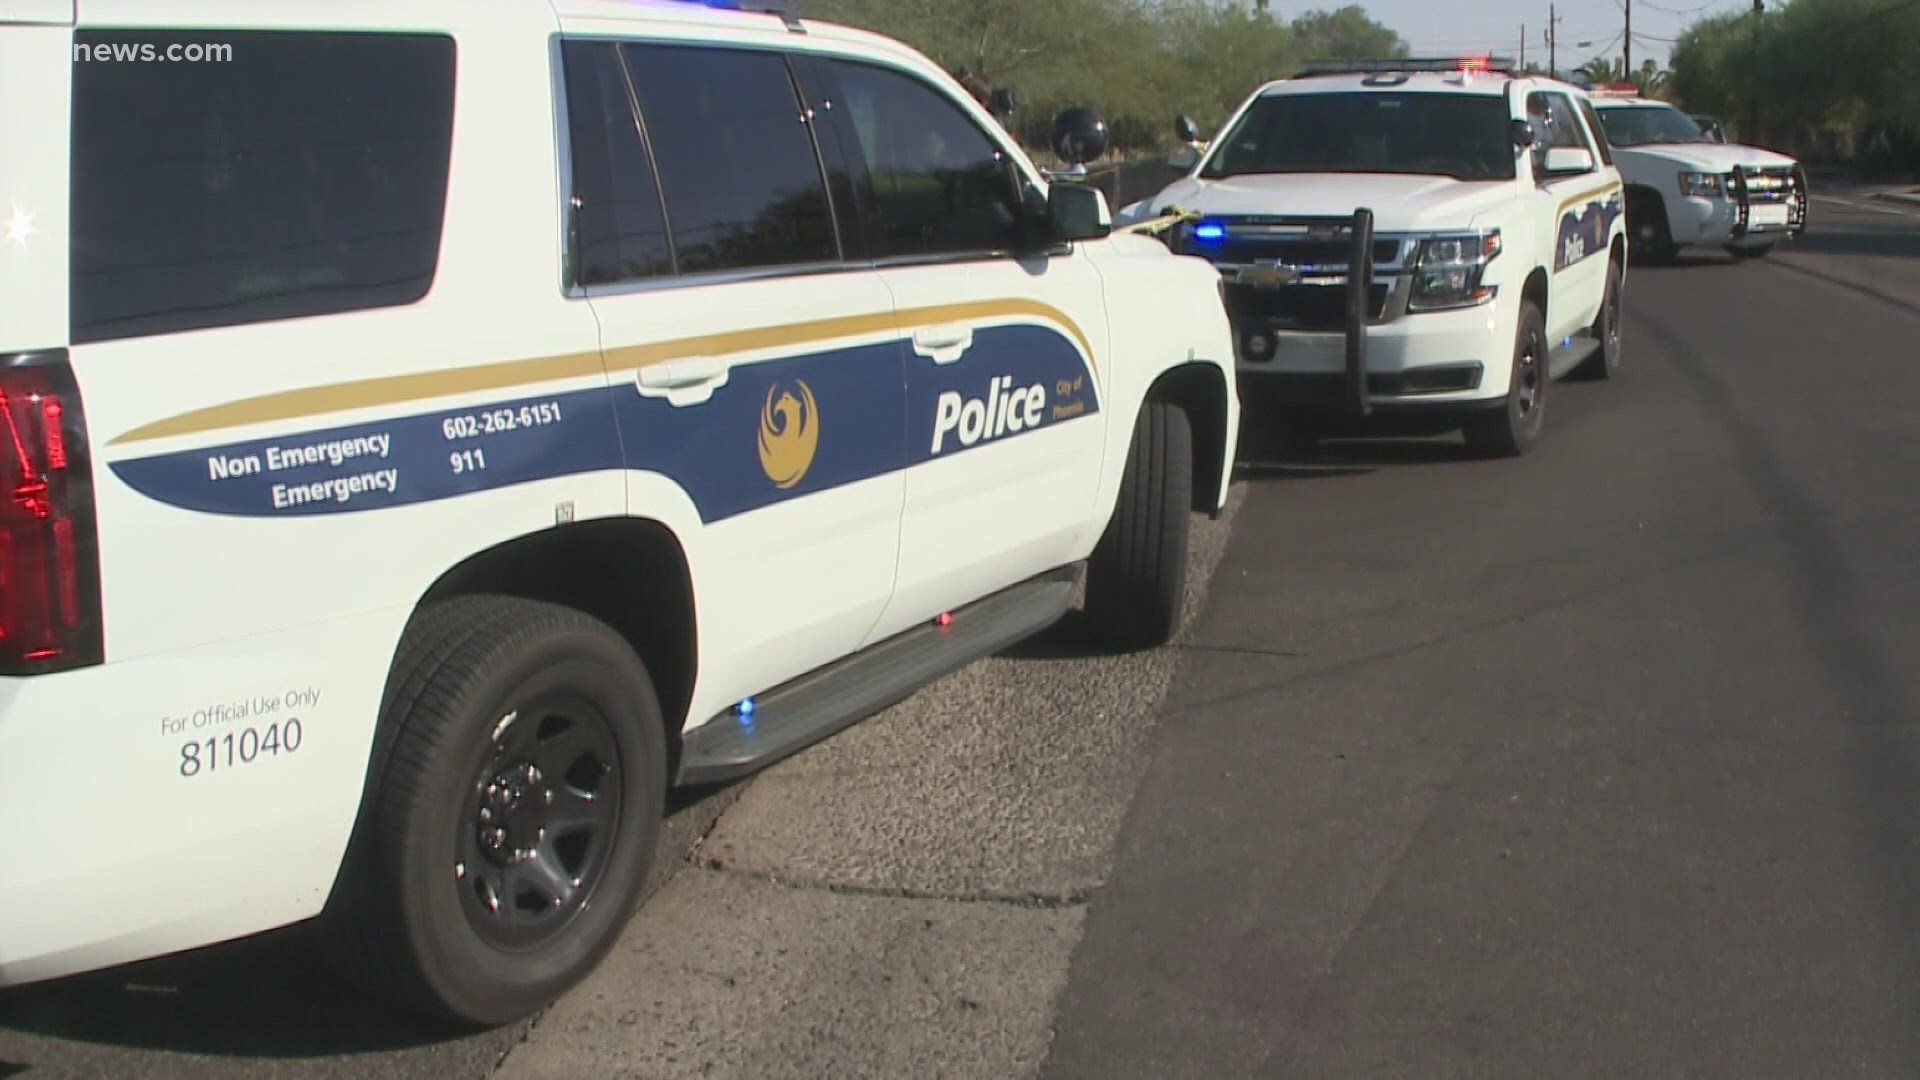 Calls for reform in law enforcement have echoed across the country this year. Now, the Arizona Police Association has put out a list of changes they would support.